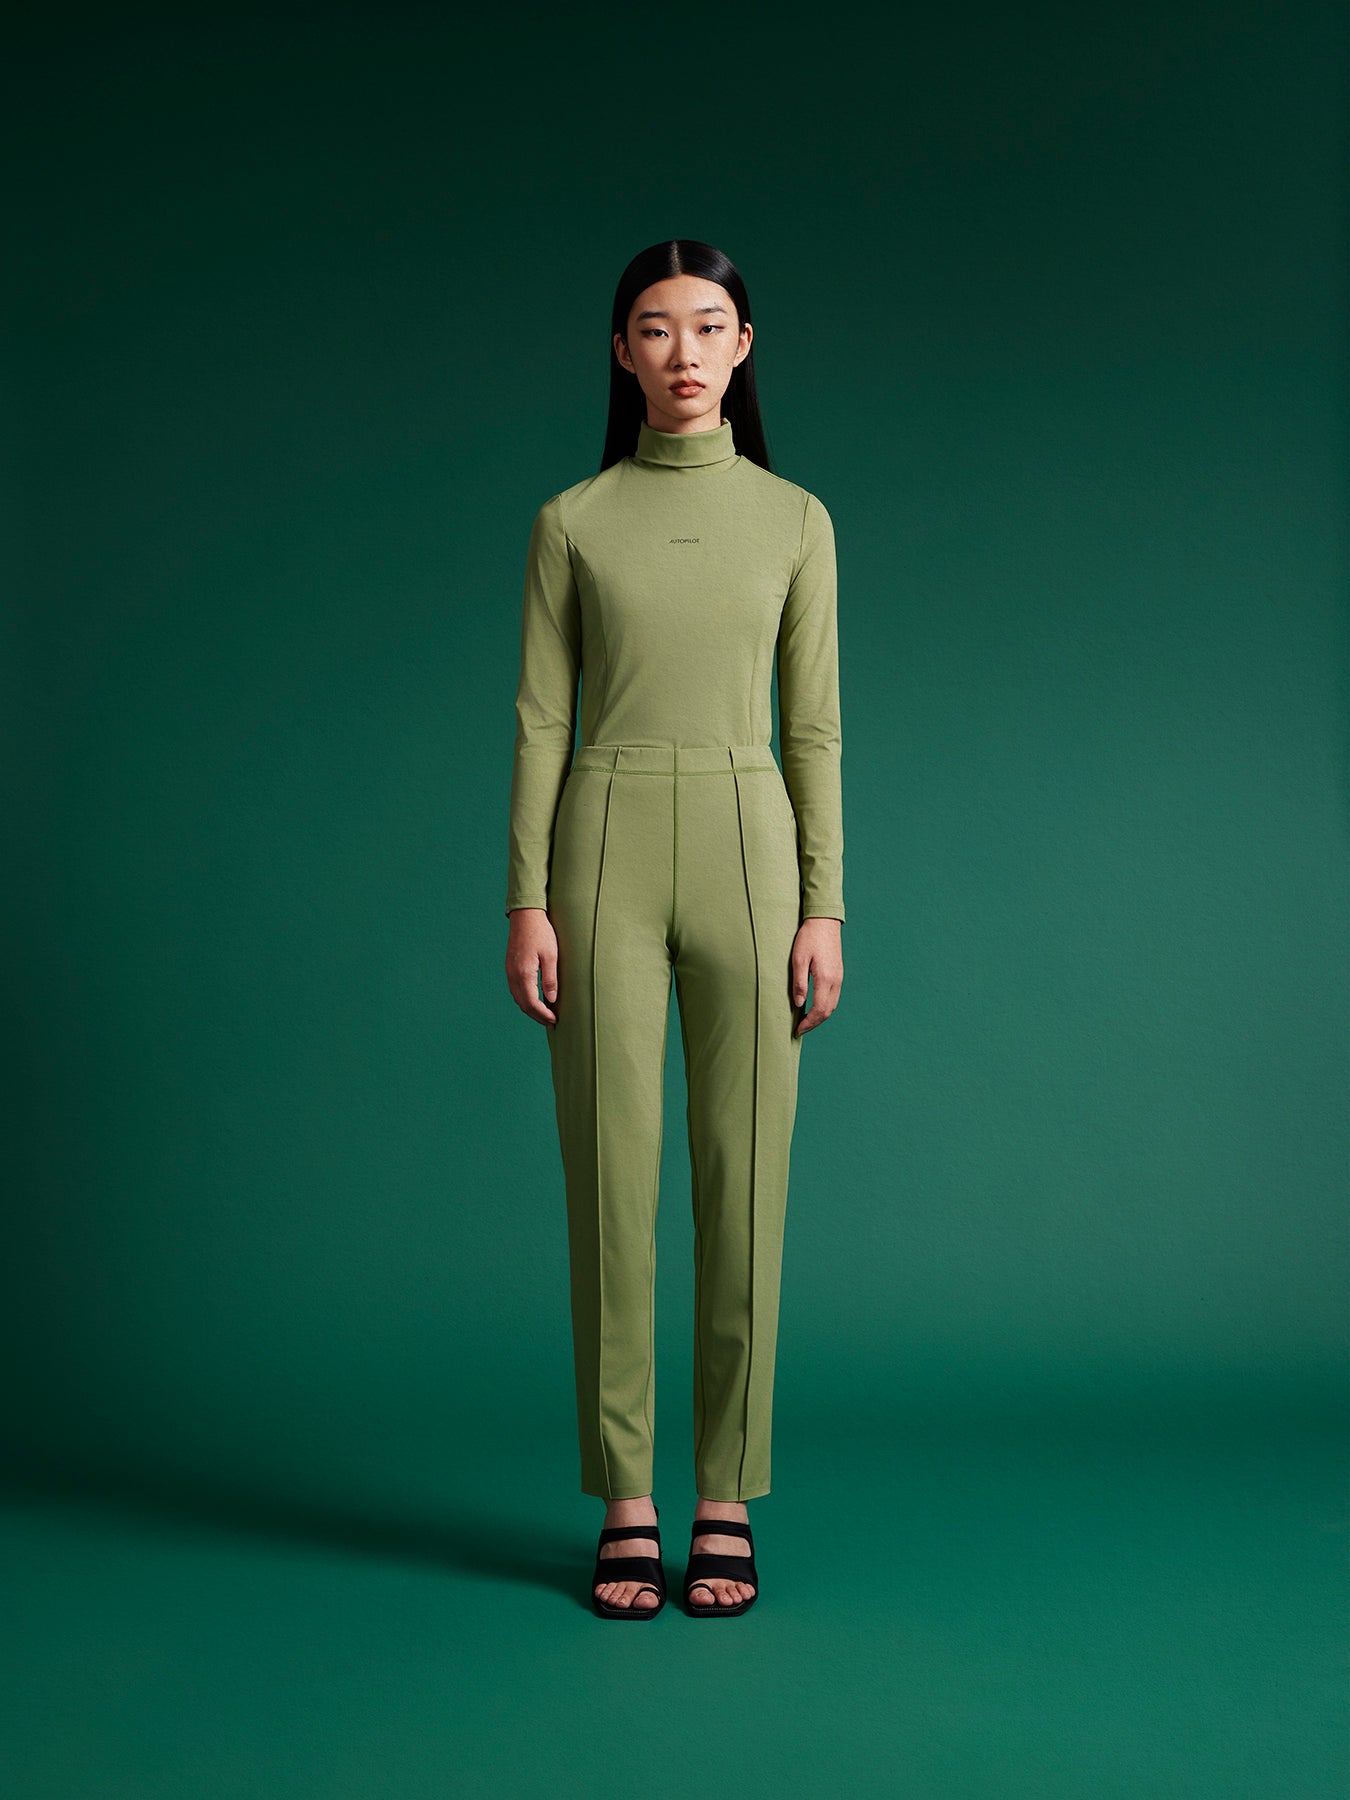 model waer green tone sporty turtle neck top and pants